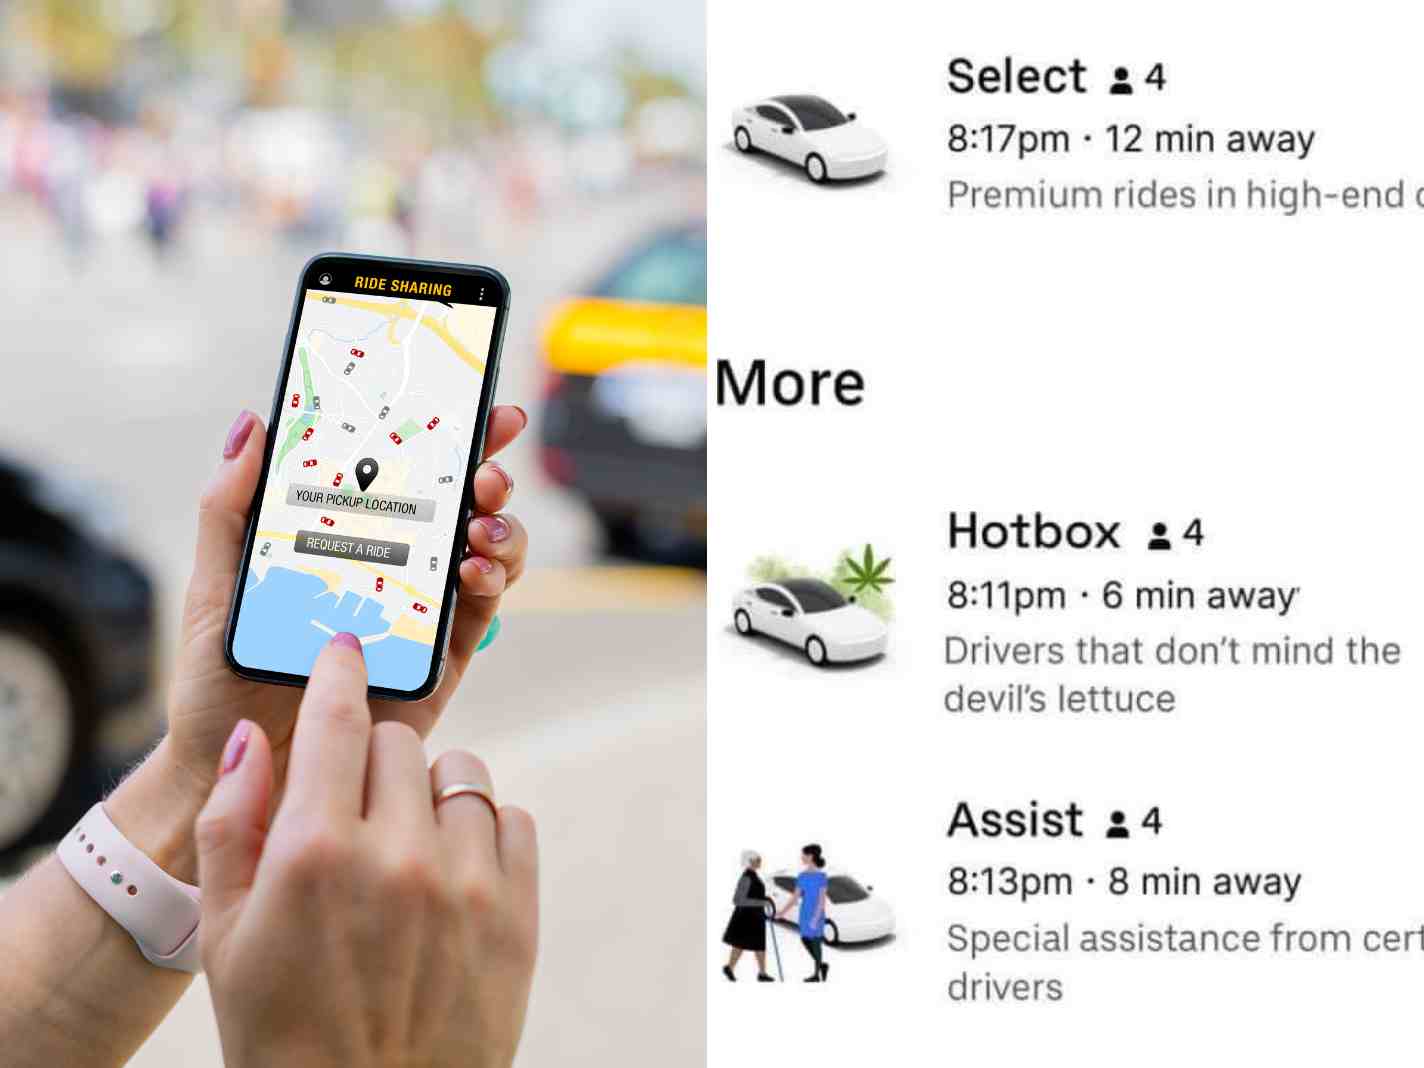 Is Uber Offering Hotbox Option? Here’s The Truth Behind Viral Screenshot